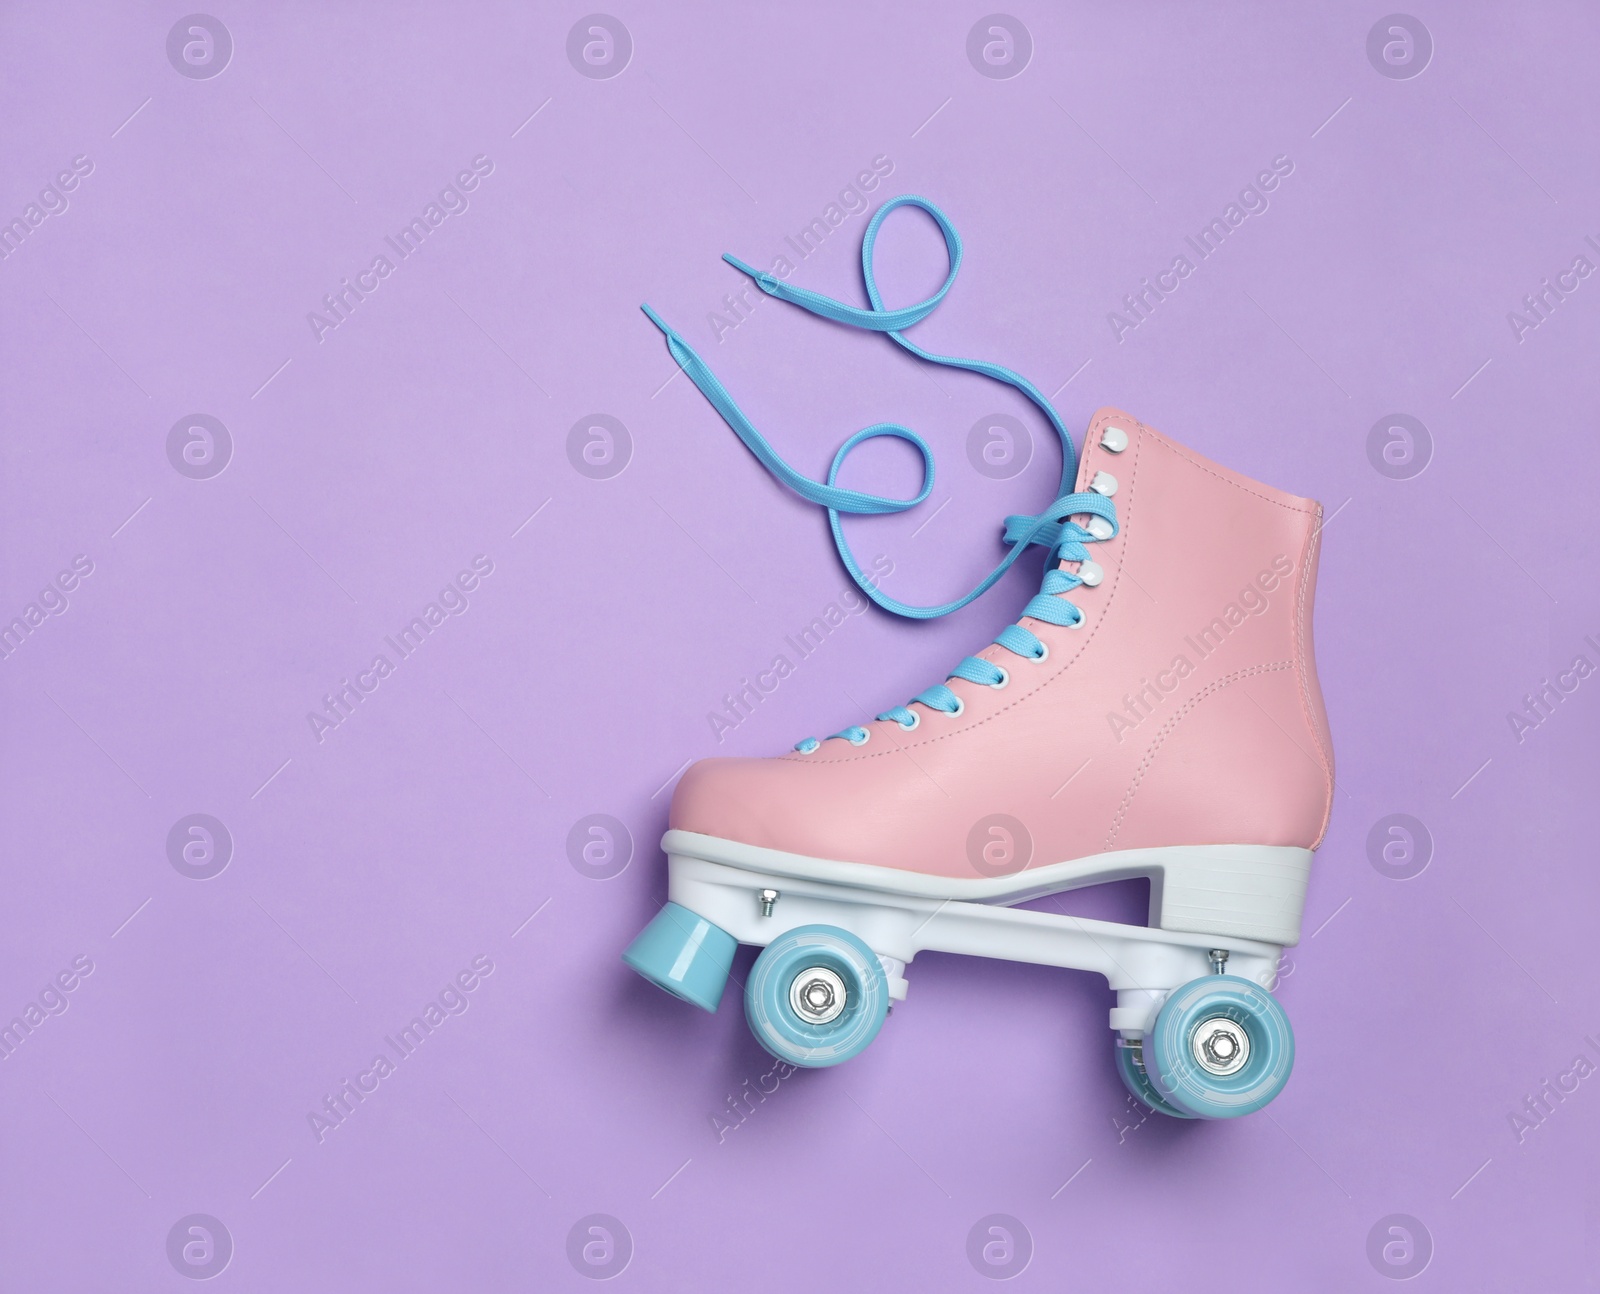 Photo of Stylish quad roller skate on color background, top view with space for text